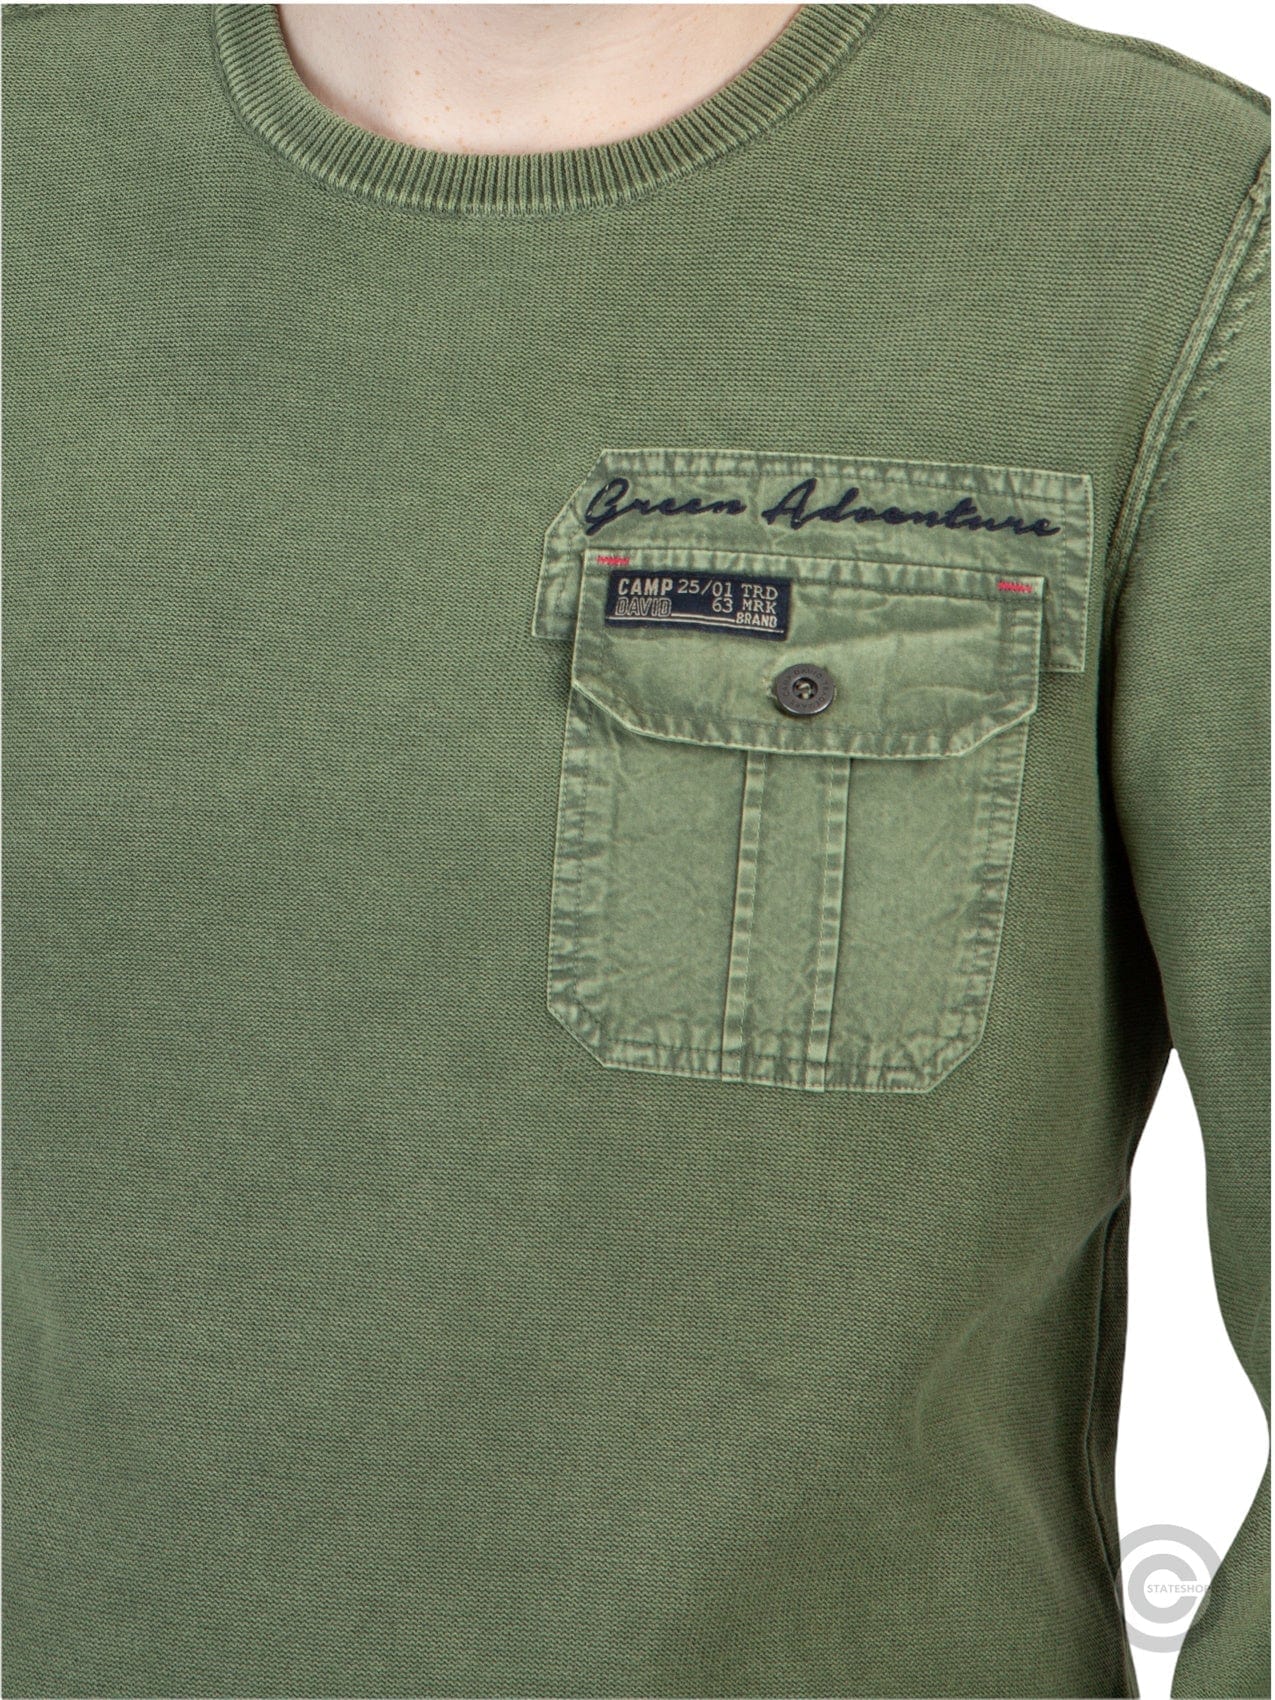 Camp DavidRound-neck sweater with print on the back, green